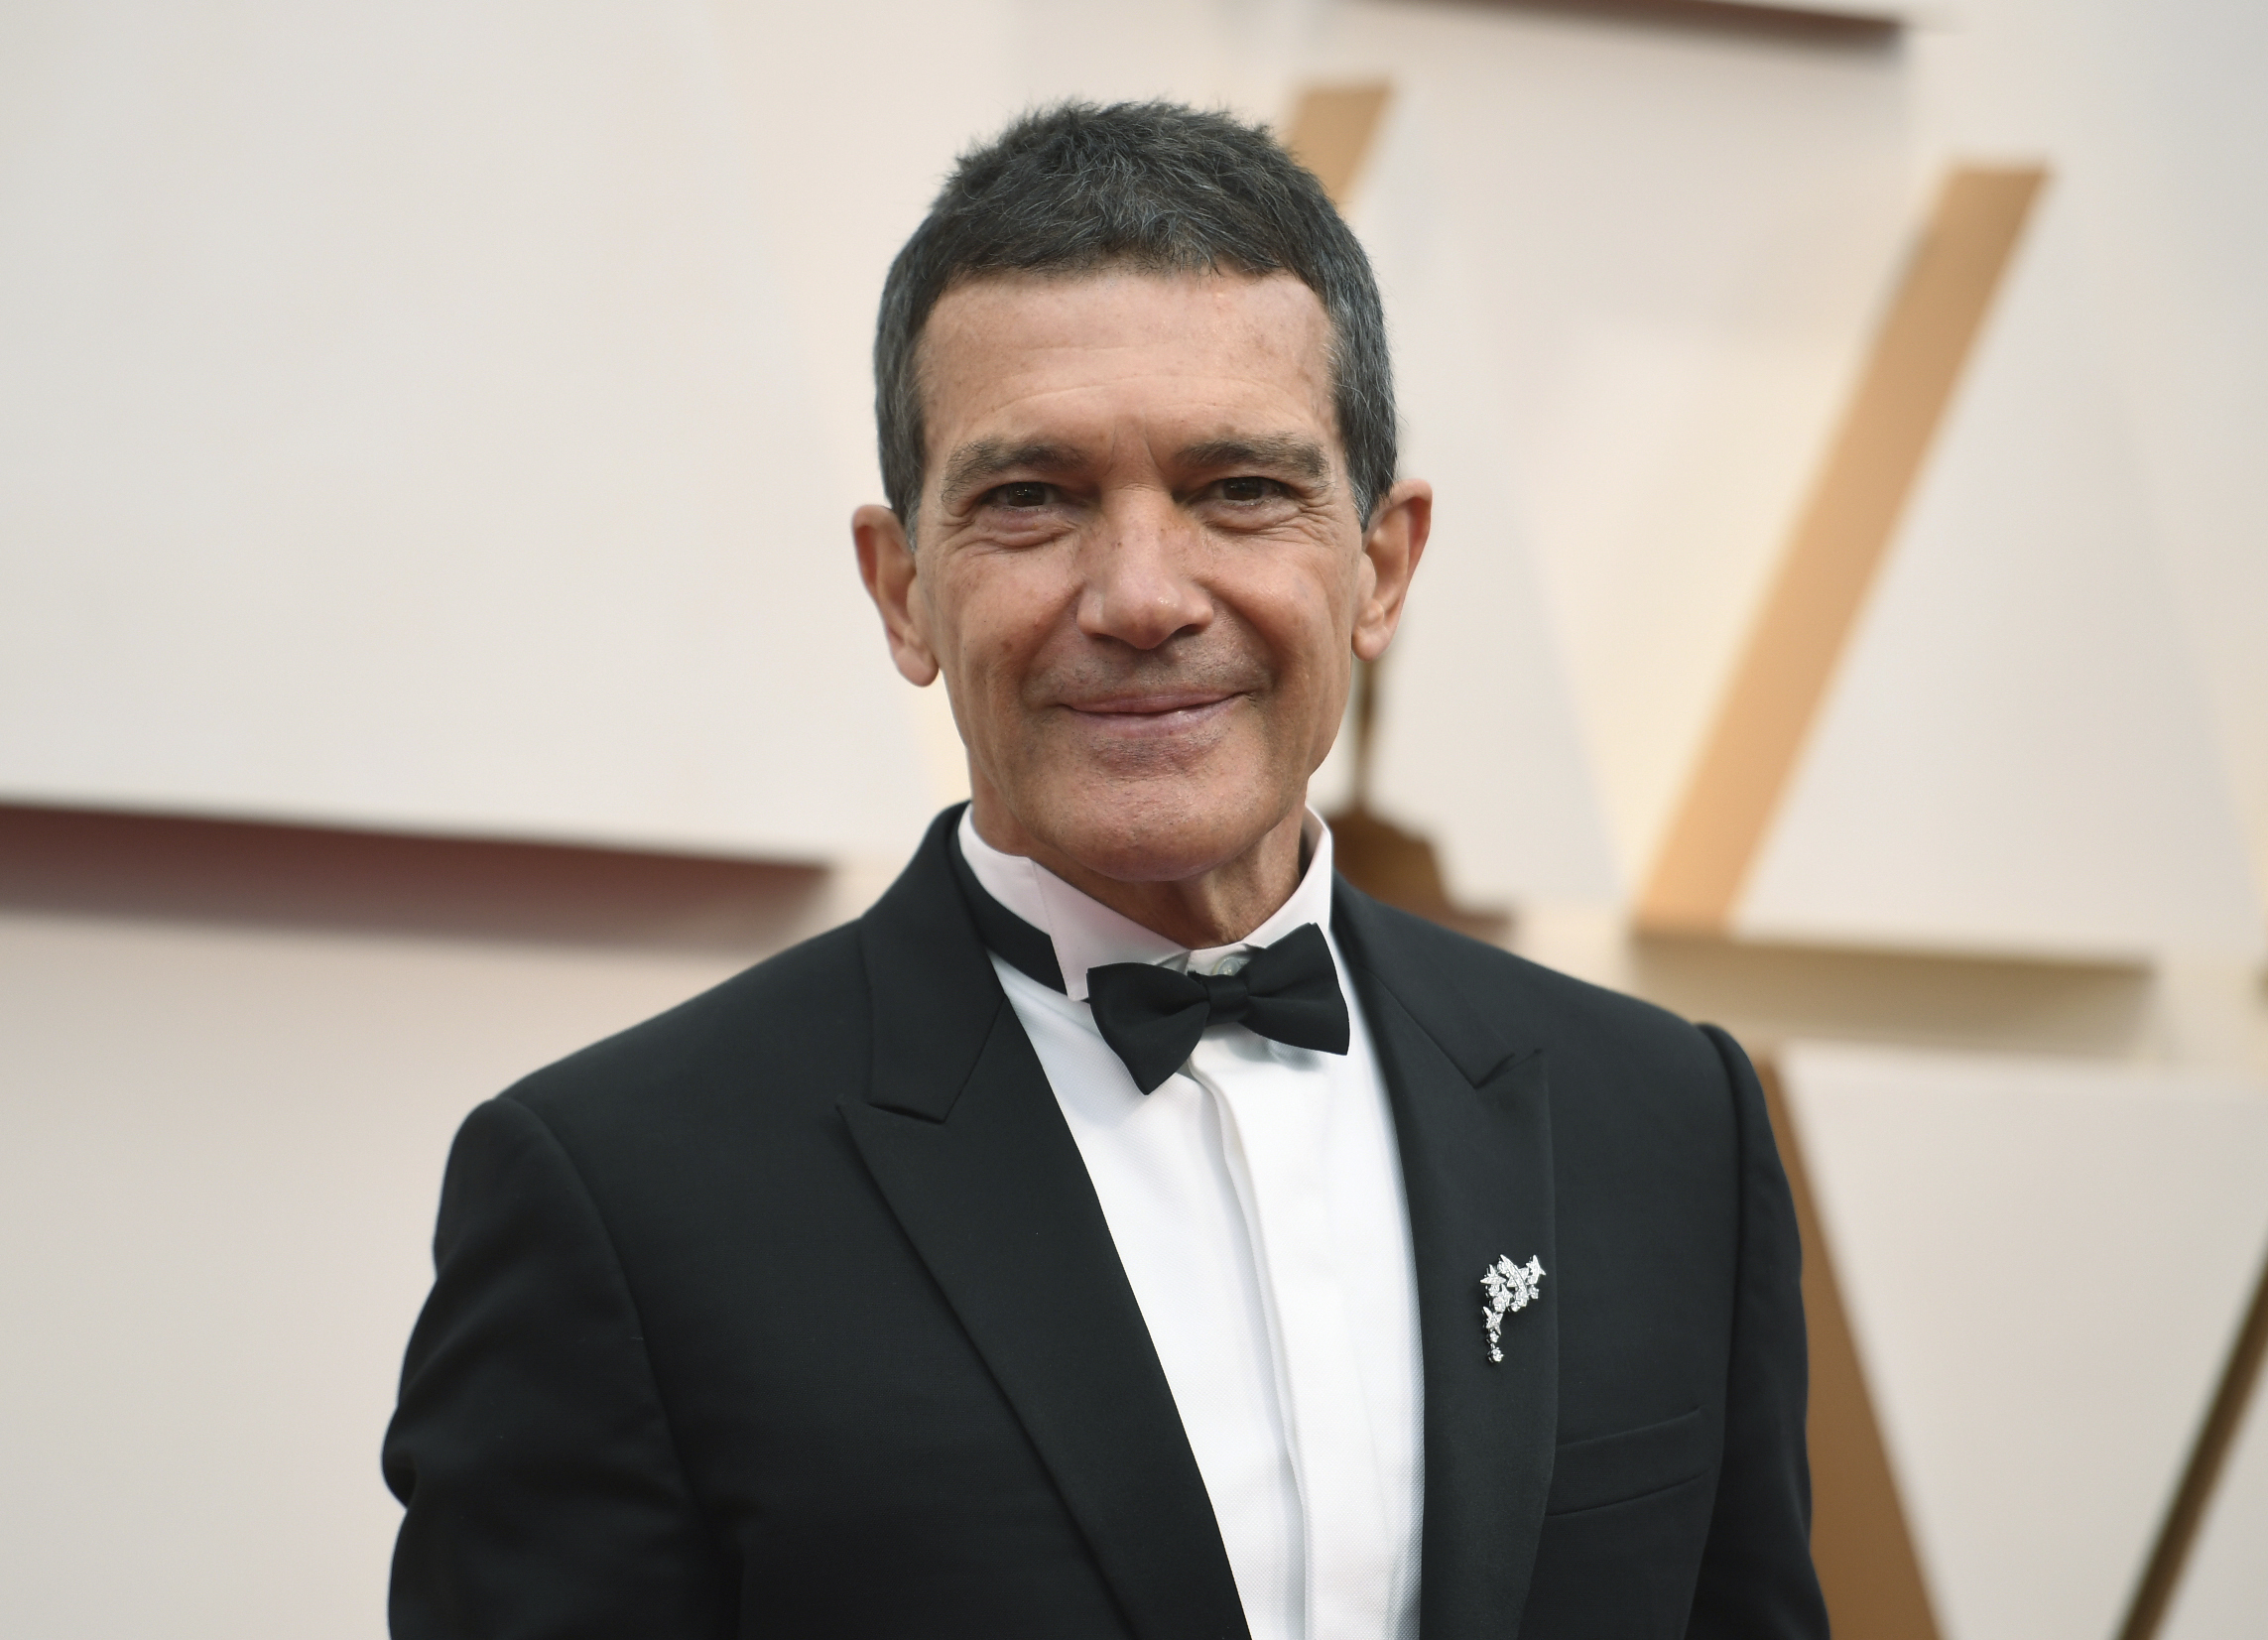 FILE - Antonio Banderas arrives at the Oscars in Los Angeles on Feb. 9, 2020.  Banderas says heu2019s tested positive for COVID-19 and is celebrating his 60th birthday in quarantine. The Spanish actor announced his positive test on Instagram on Monday. Photo: AP